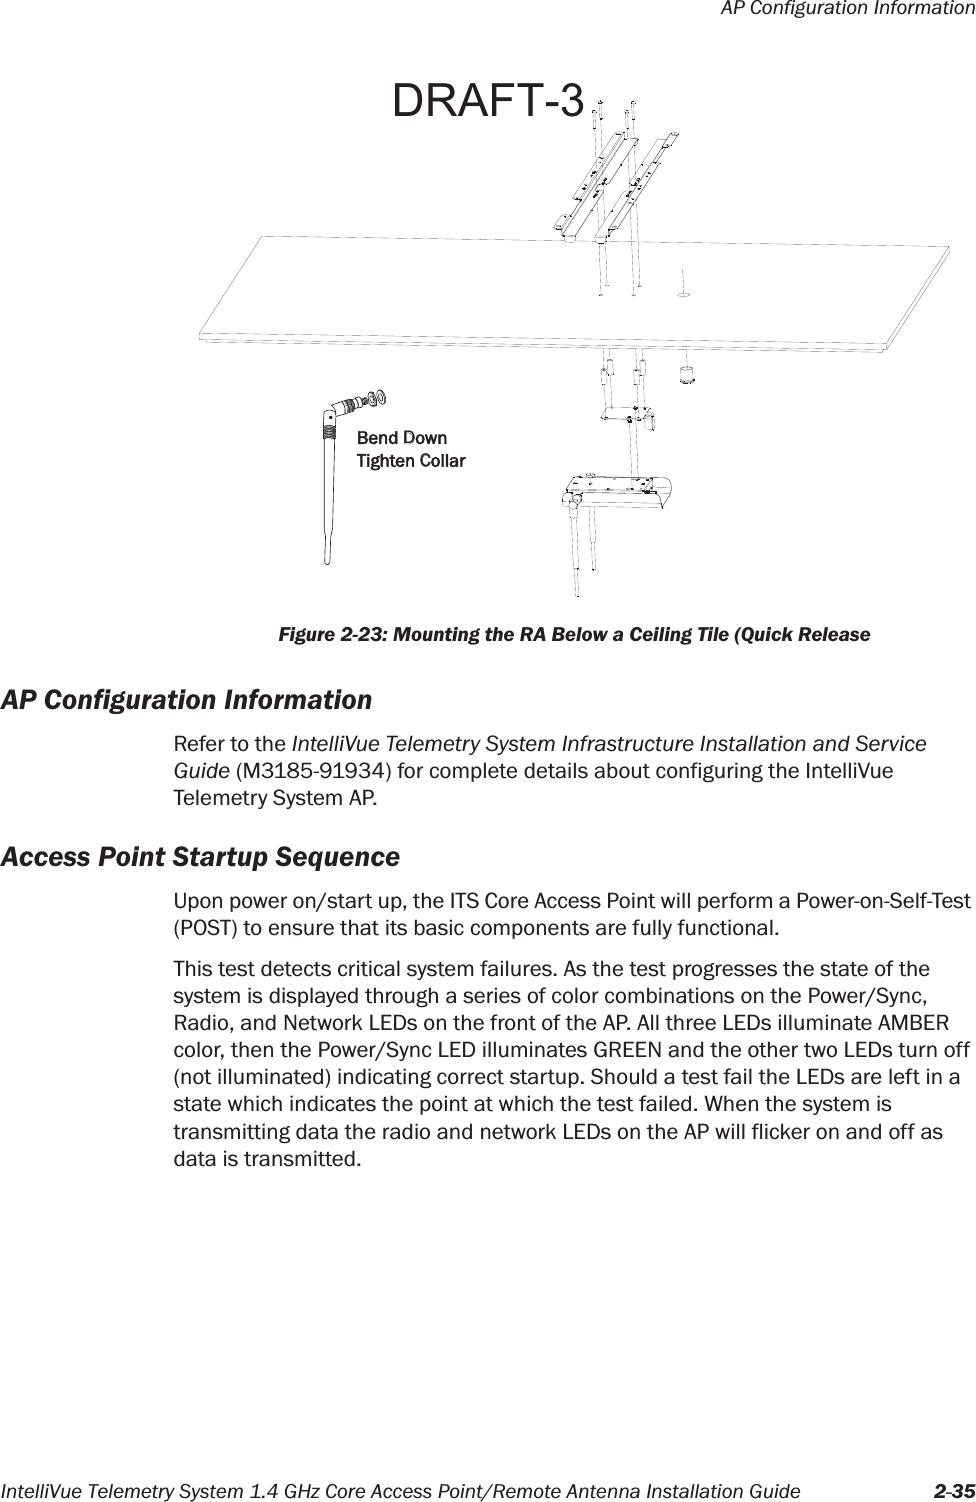 AP Configuration InformationIntelliVue Telemetry System 1.4 GHz Core Access Point/Remote Antenna Installation Guide 2-35AP Configuration InformationRefer to the IntelliVue Telemetry System Infrastructure Installation and Service Guide (M3185-91934) for complete details about configuring the IntelliVue Telemetry System AP.Access Point Startup SequenceUpon power on/start up, the ITS Core Access Point will perform a Power-on-Self-Test (POST) to ensure that its basic components are fully functional.This test detects critical system failures. As the test progresses the state of the system is displayed through a series of color combinations on the Power/Sync, Radio, and Network LEDs on the front of the AP. All three LEDs illuminate AMBER color, then the Power/Sync LED illuminates GREEN and the other two LEDs turn off (not illuminated) indicating correct startup. Should a test fail the LEDs are left in a state which indicates the point at which the test failed. When the system is transmitting data the radio and network LEDs on the AP will flicker on and off as data is transmitted.Figure 2-23: Mounting the RA Below a Ceiling Tile (Quick ReleaseBend DownTighten CollarDRAFT-3